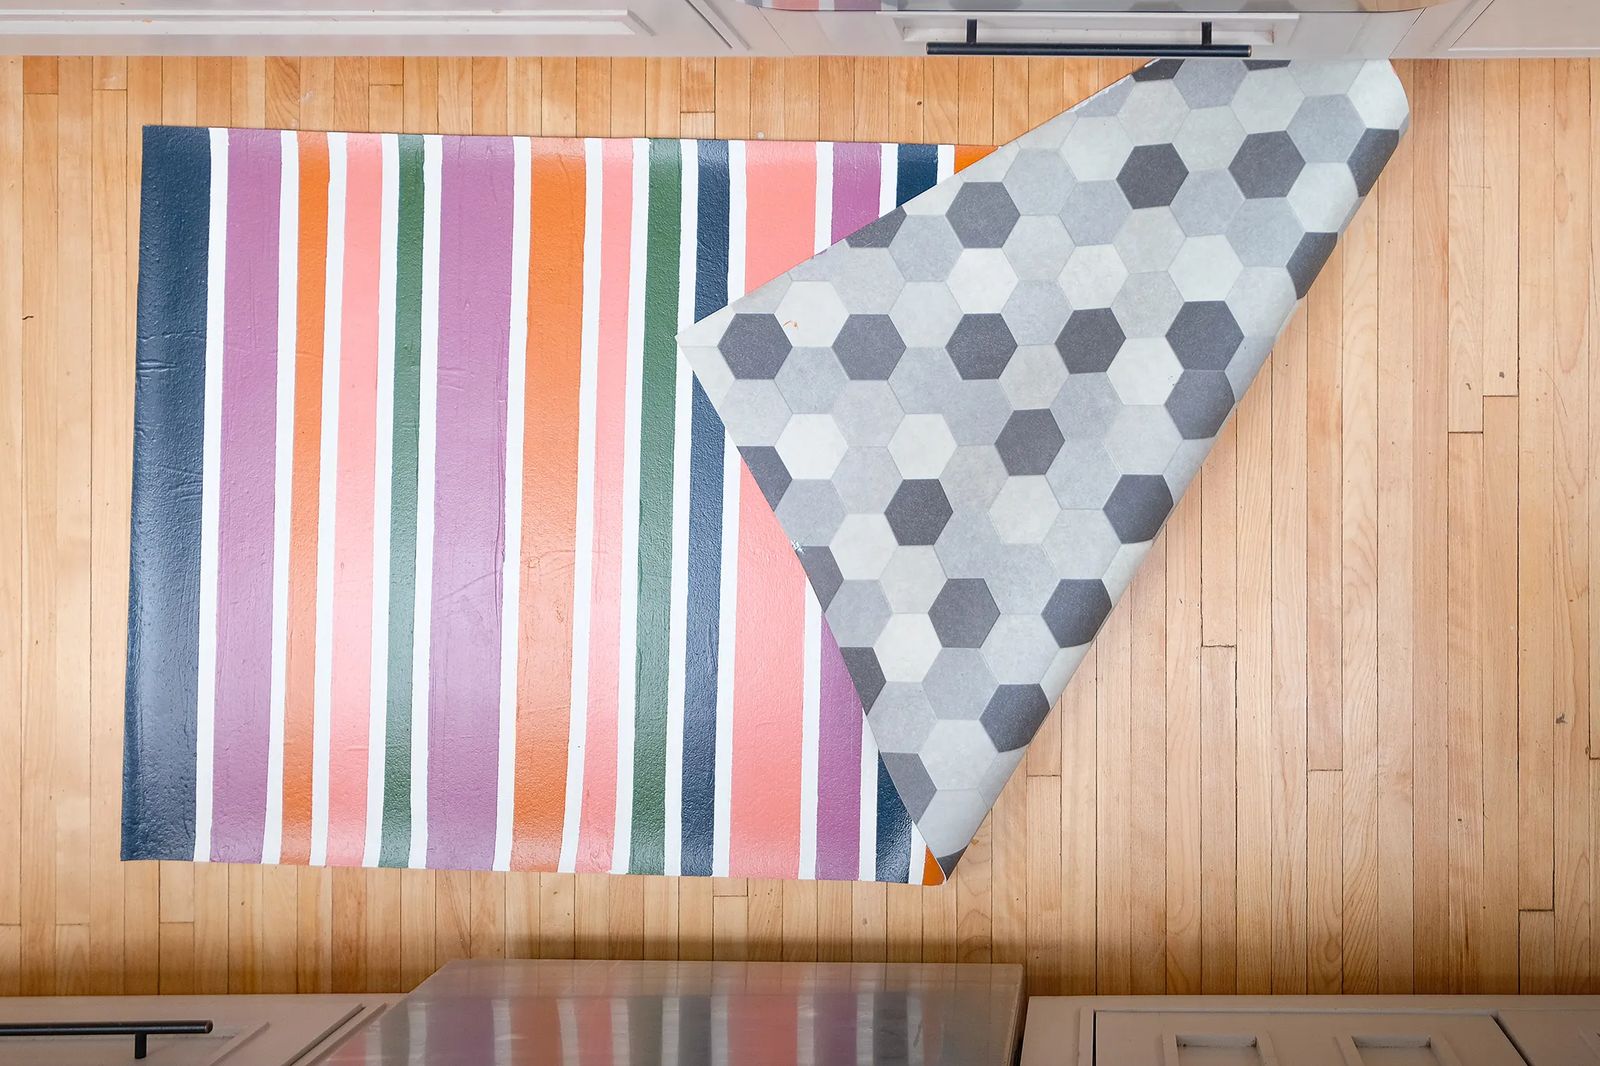 Waterproof Washable, How To Make A Floor Cloth From Vinyl